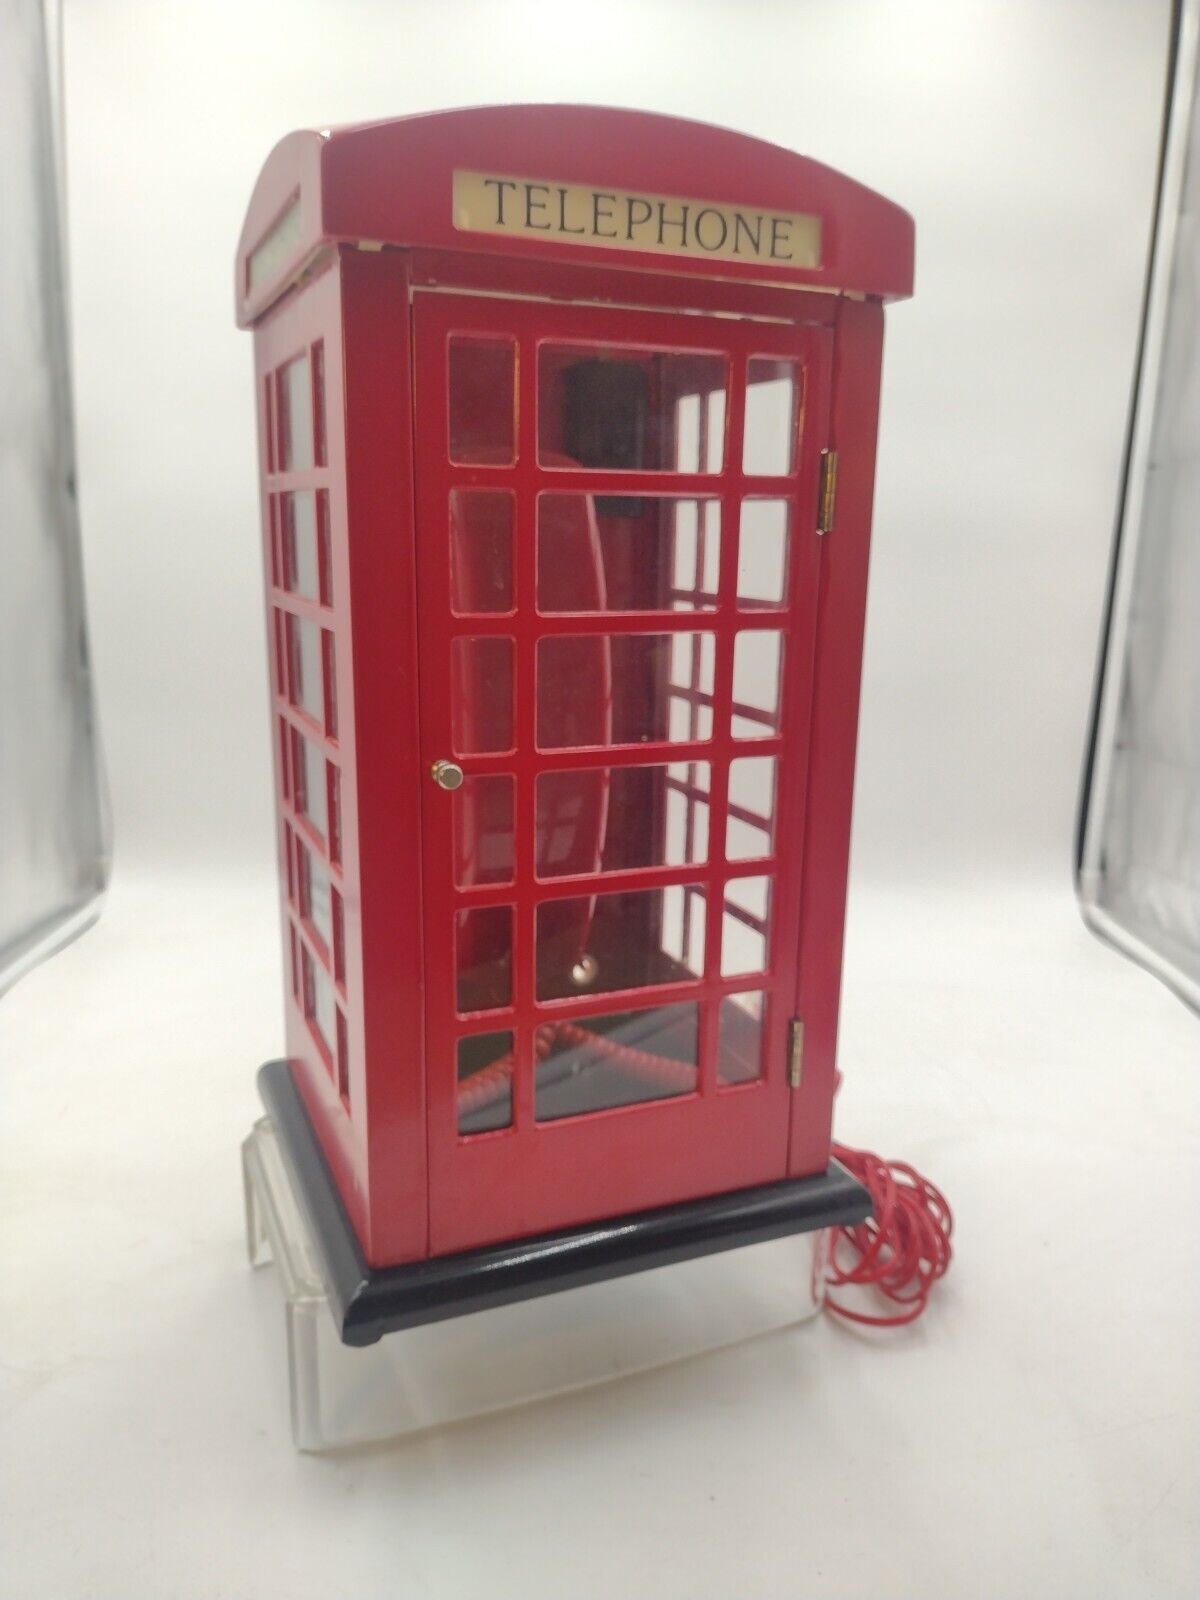 English Phone Booth Phone By Olde Tyme Reproductions Inc 